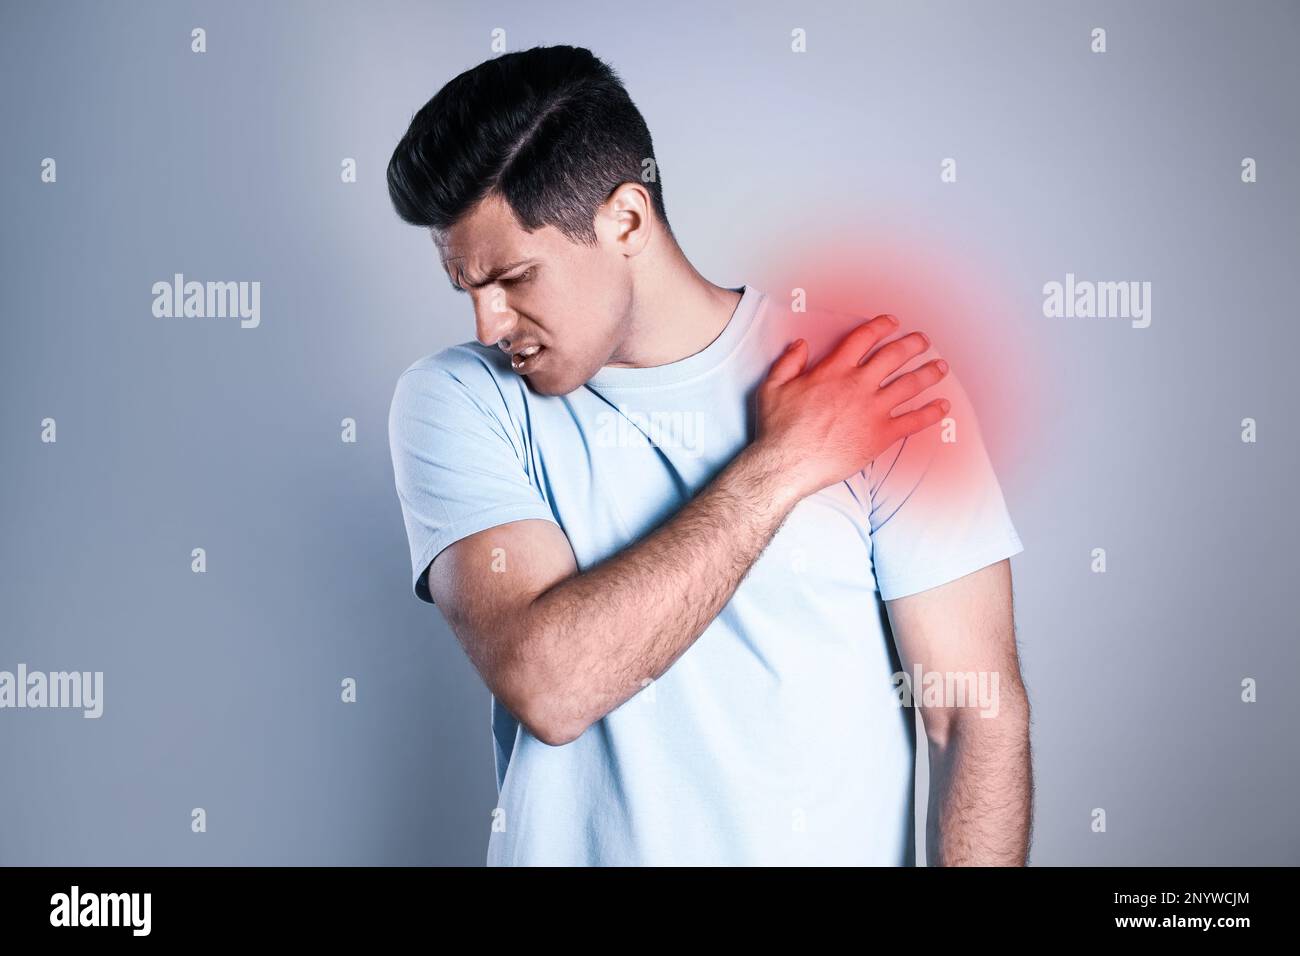 Man suffering from shoulder pain on grey background Stock Photo